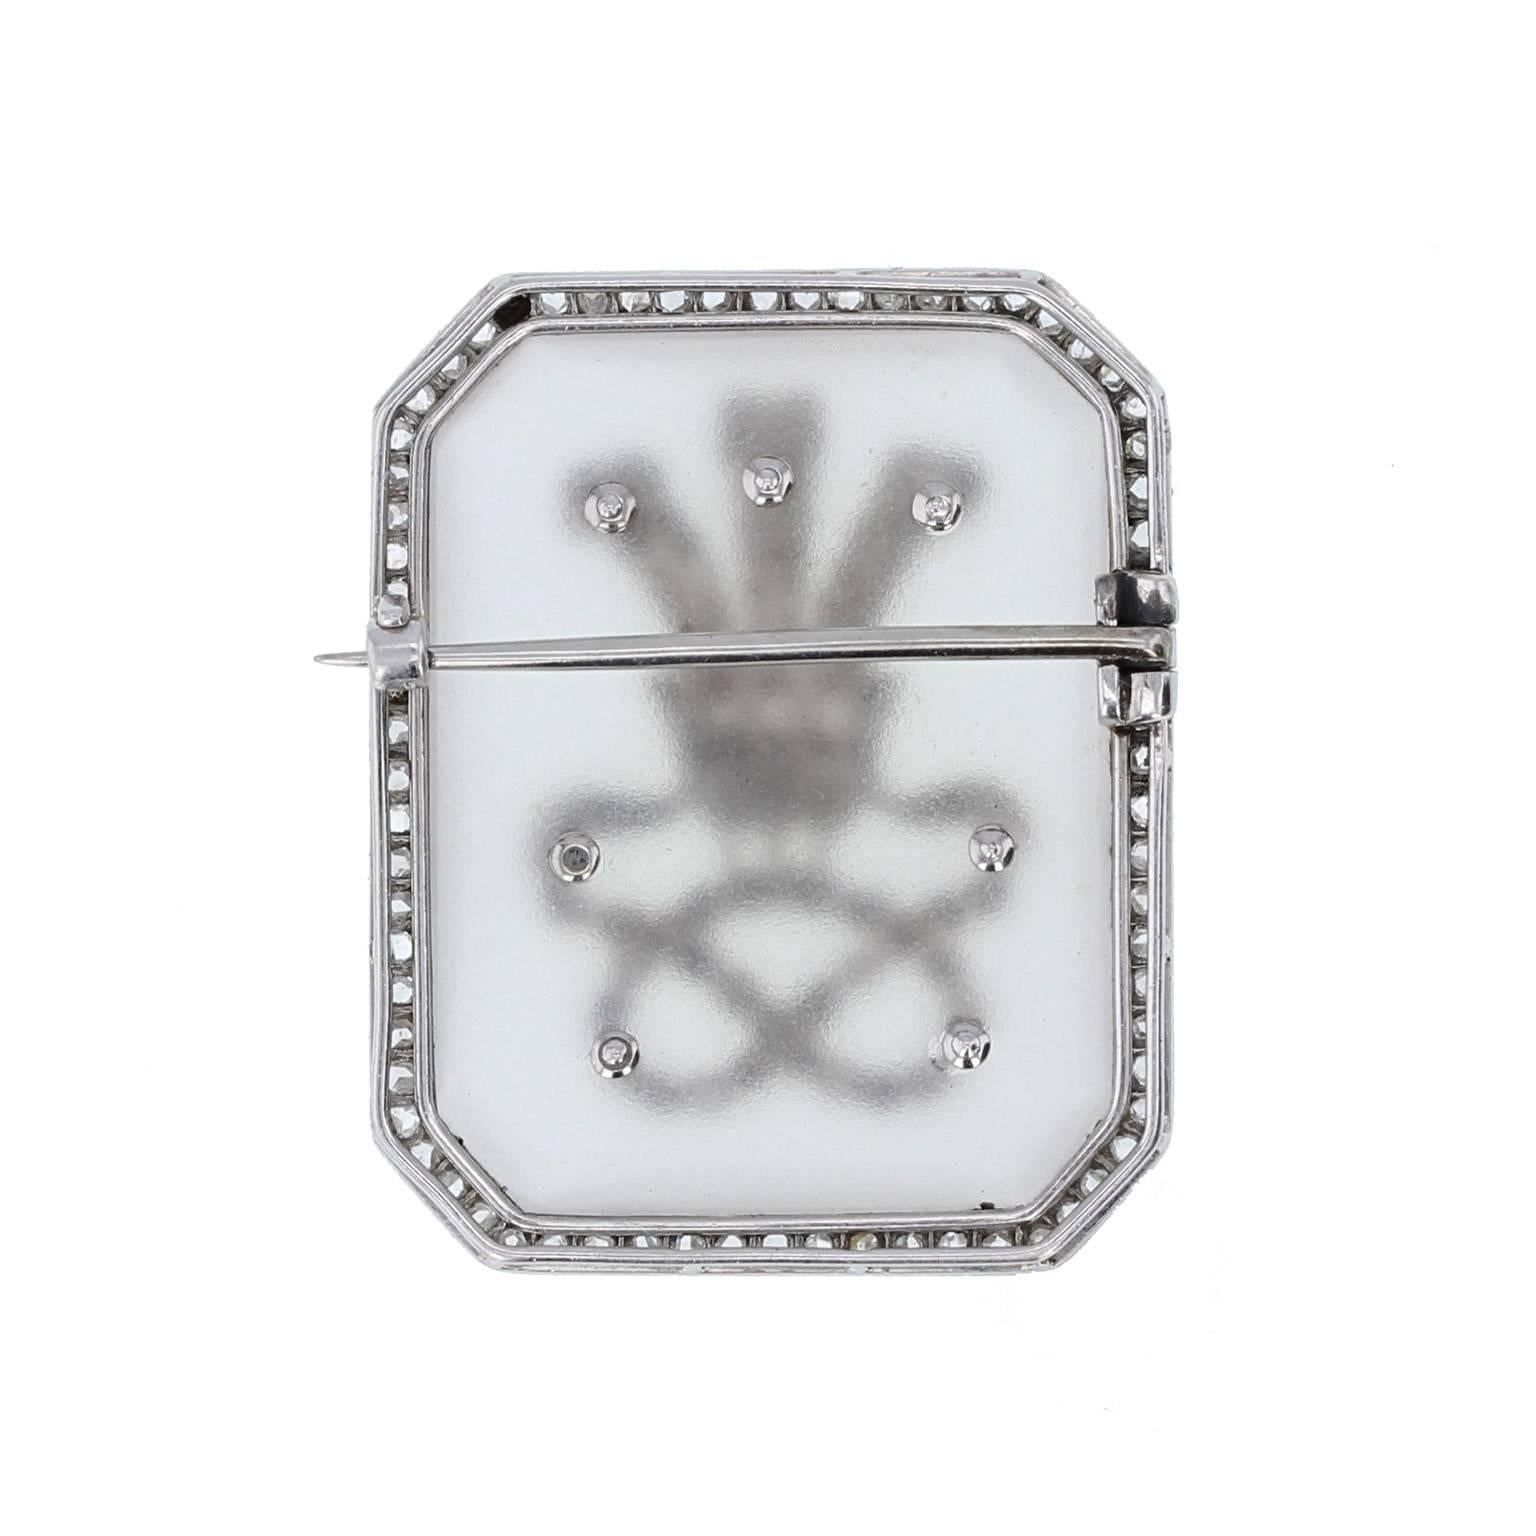  fine and impressive antique brooch. Fashioned from a rectangular piece of rock crystal, set in a border of rose-cut diamonds. A central emblem of ostrich feathers in a coronet adorned with further rose-cut diamonds. In excellent condition.
